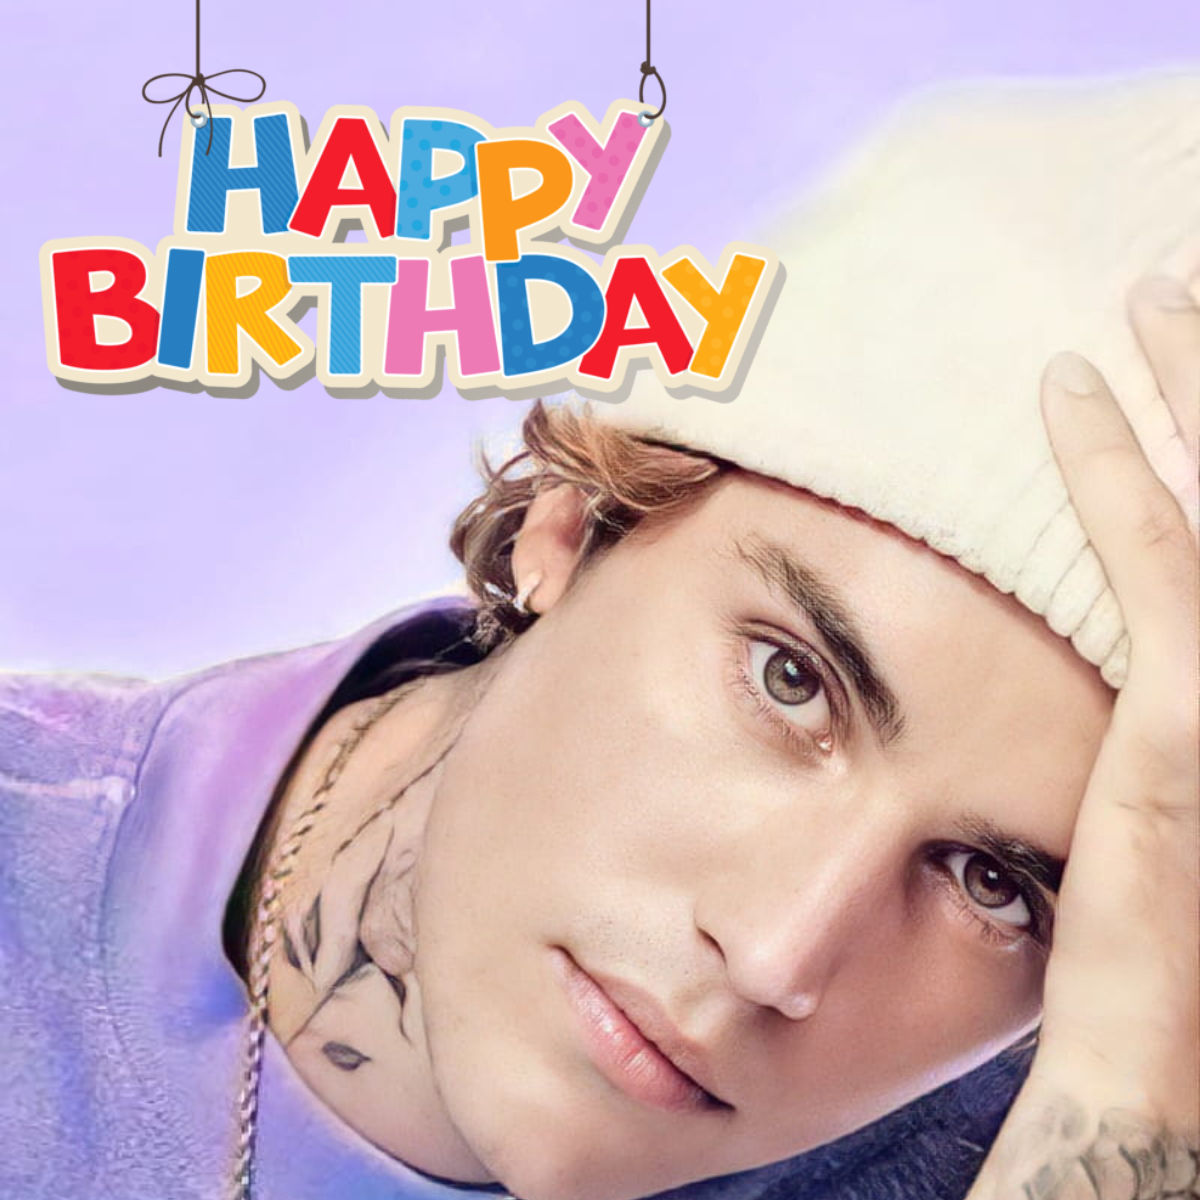 Justin Bieber Quotes for Birthday